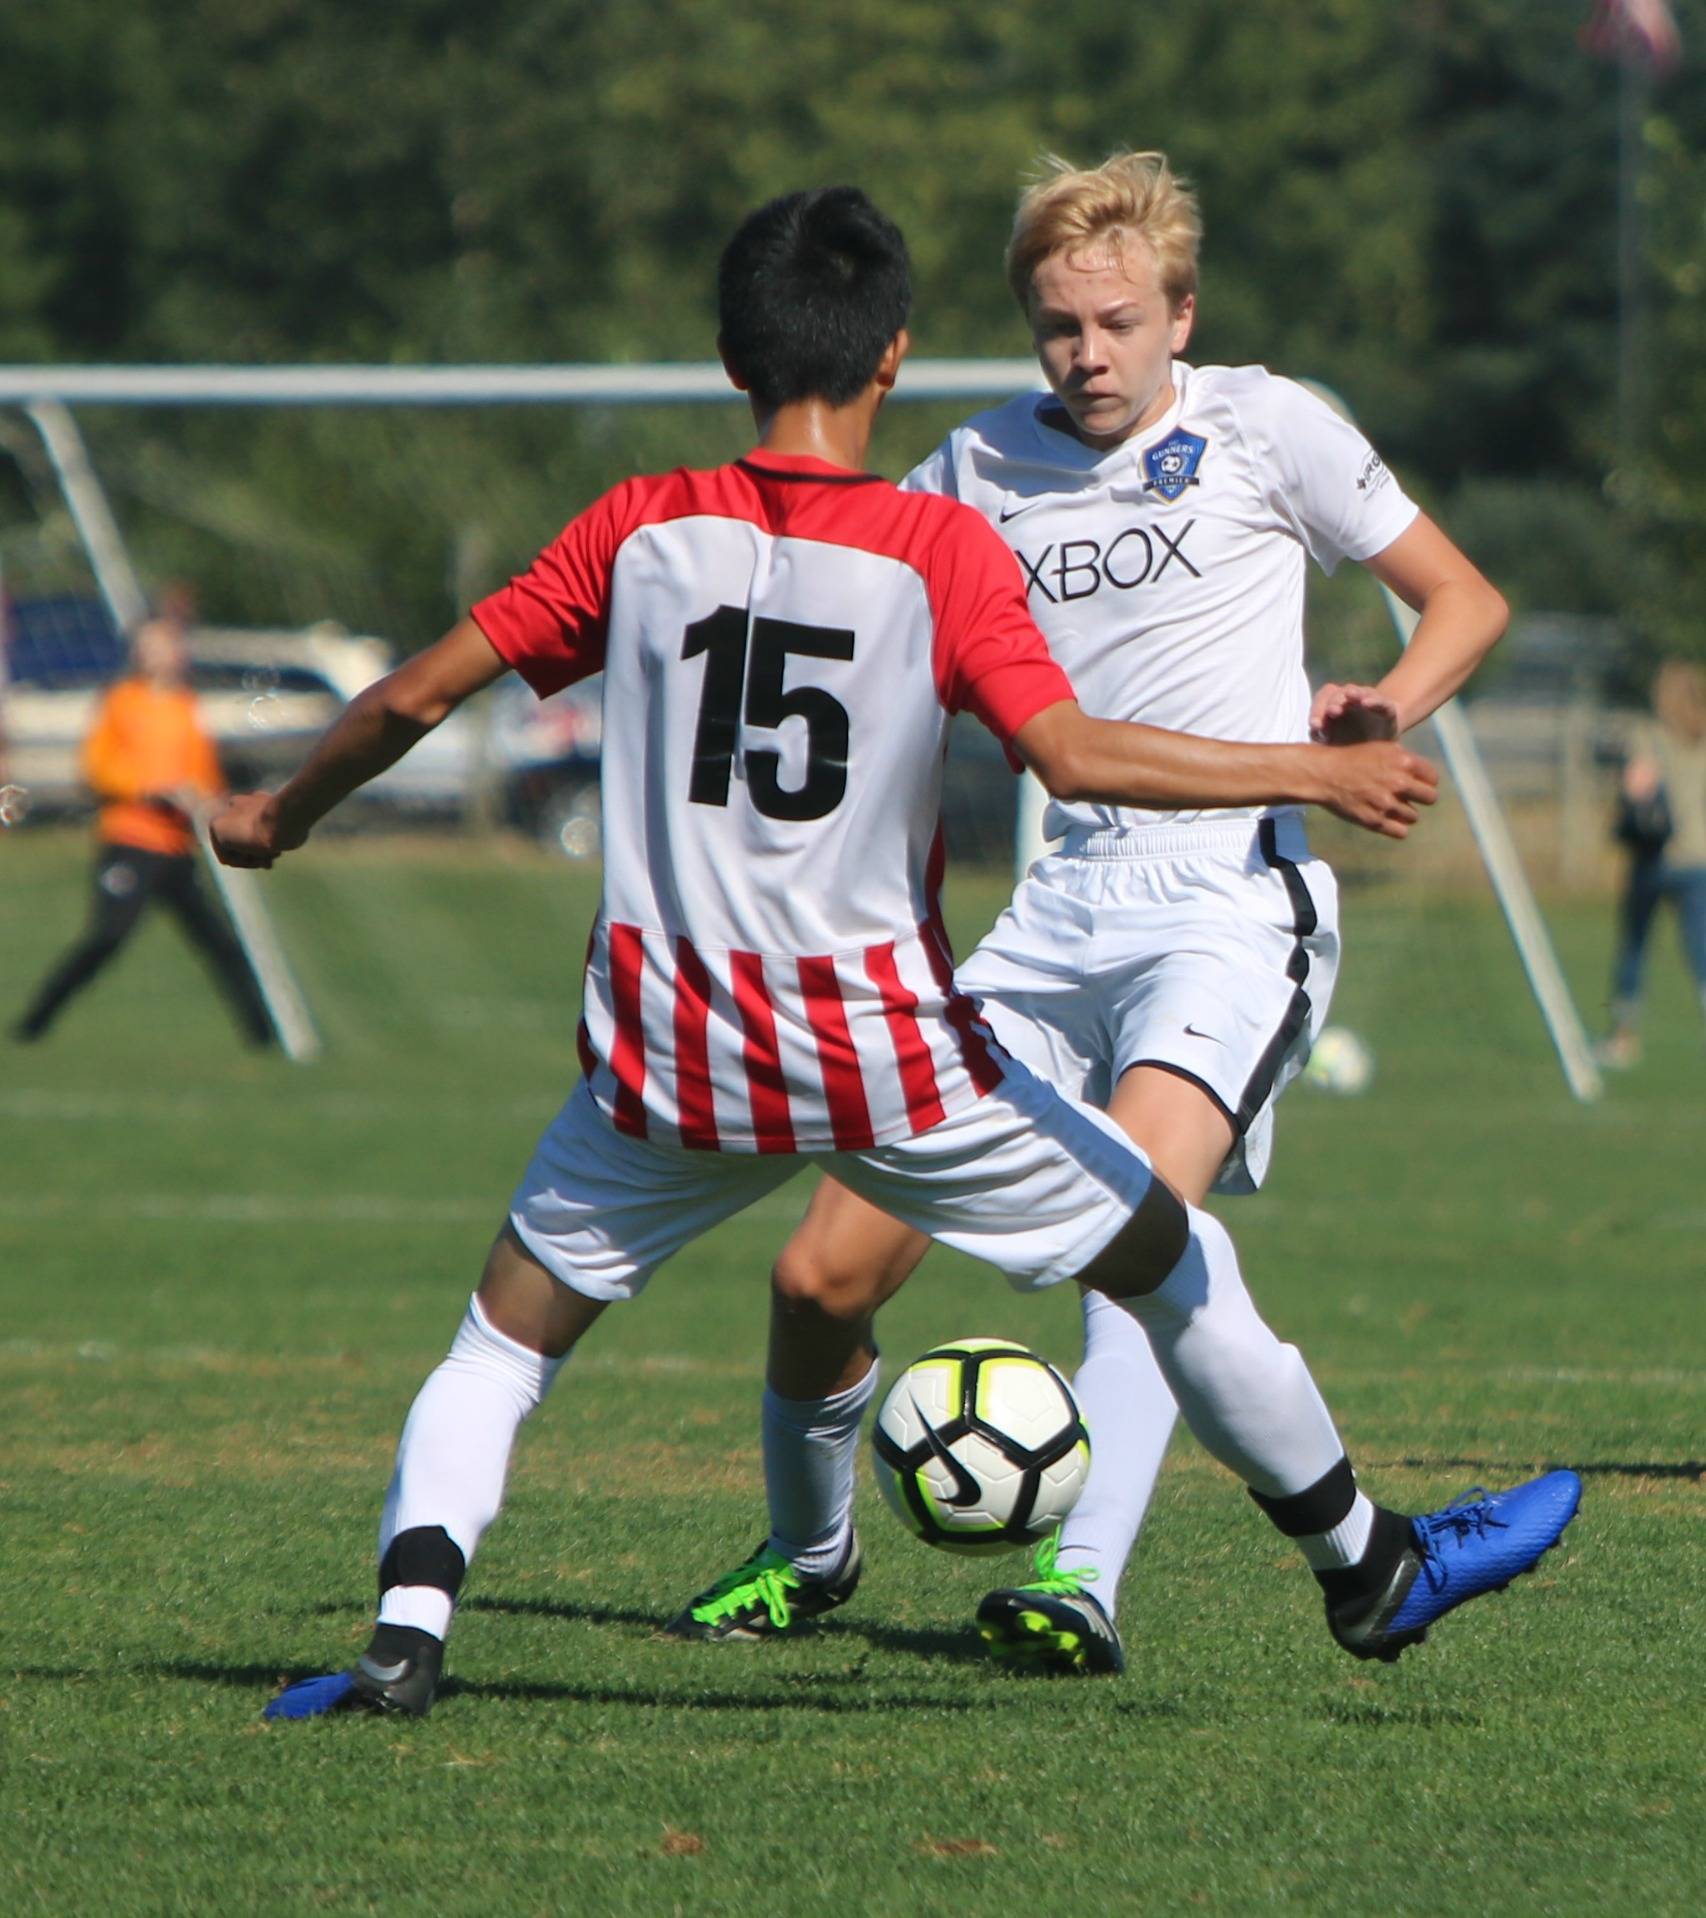 ISC Gunners FC took on Crossfire Select in a U19 boys soccer match on July 26. Andy Nystrom/ staff photo